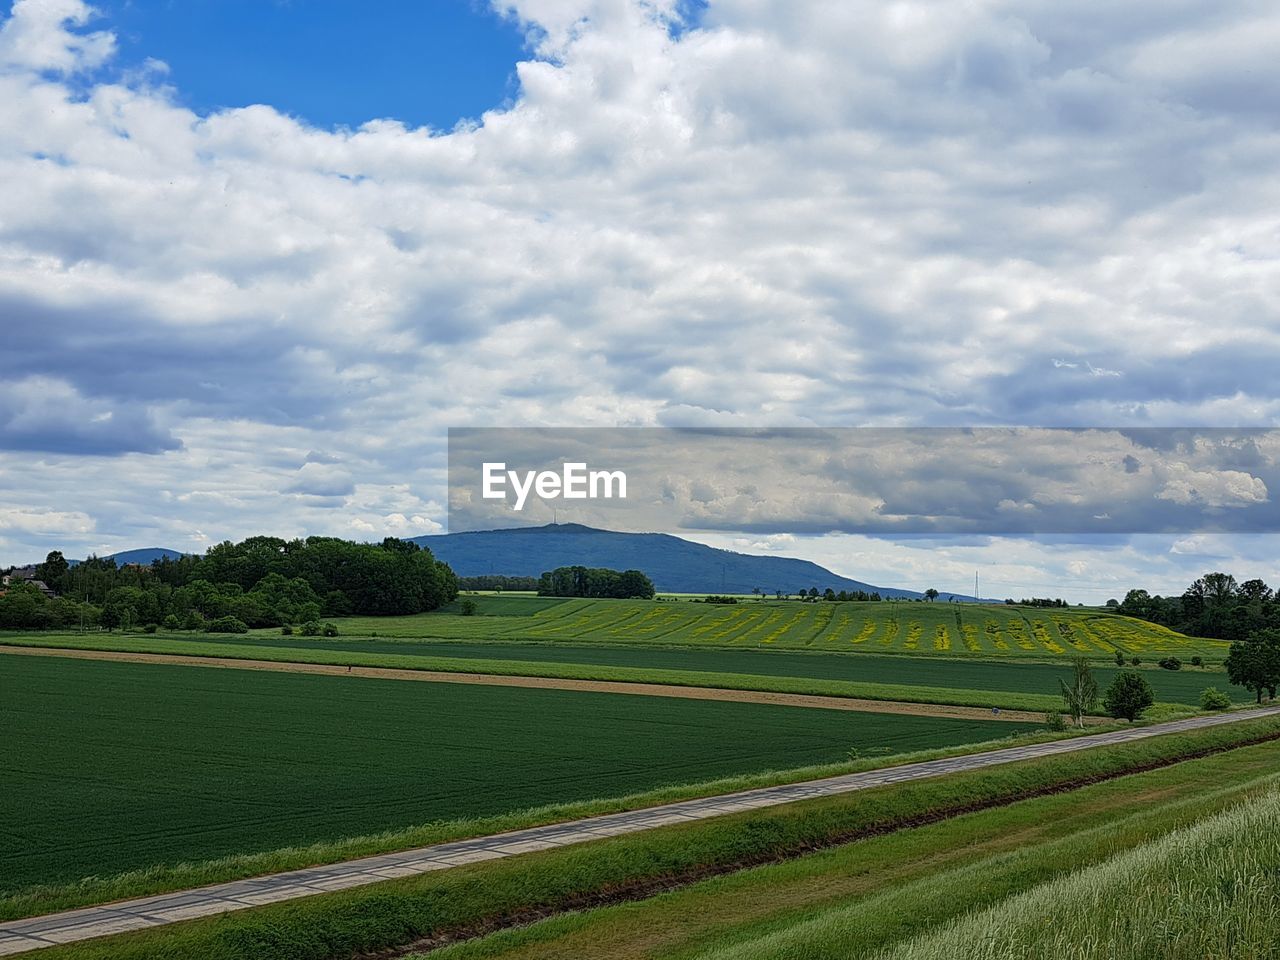 Scenic view of agricultural field and sleza mountain against sky in poland.